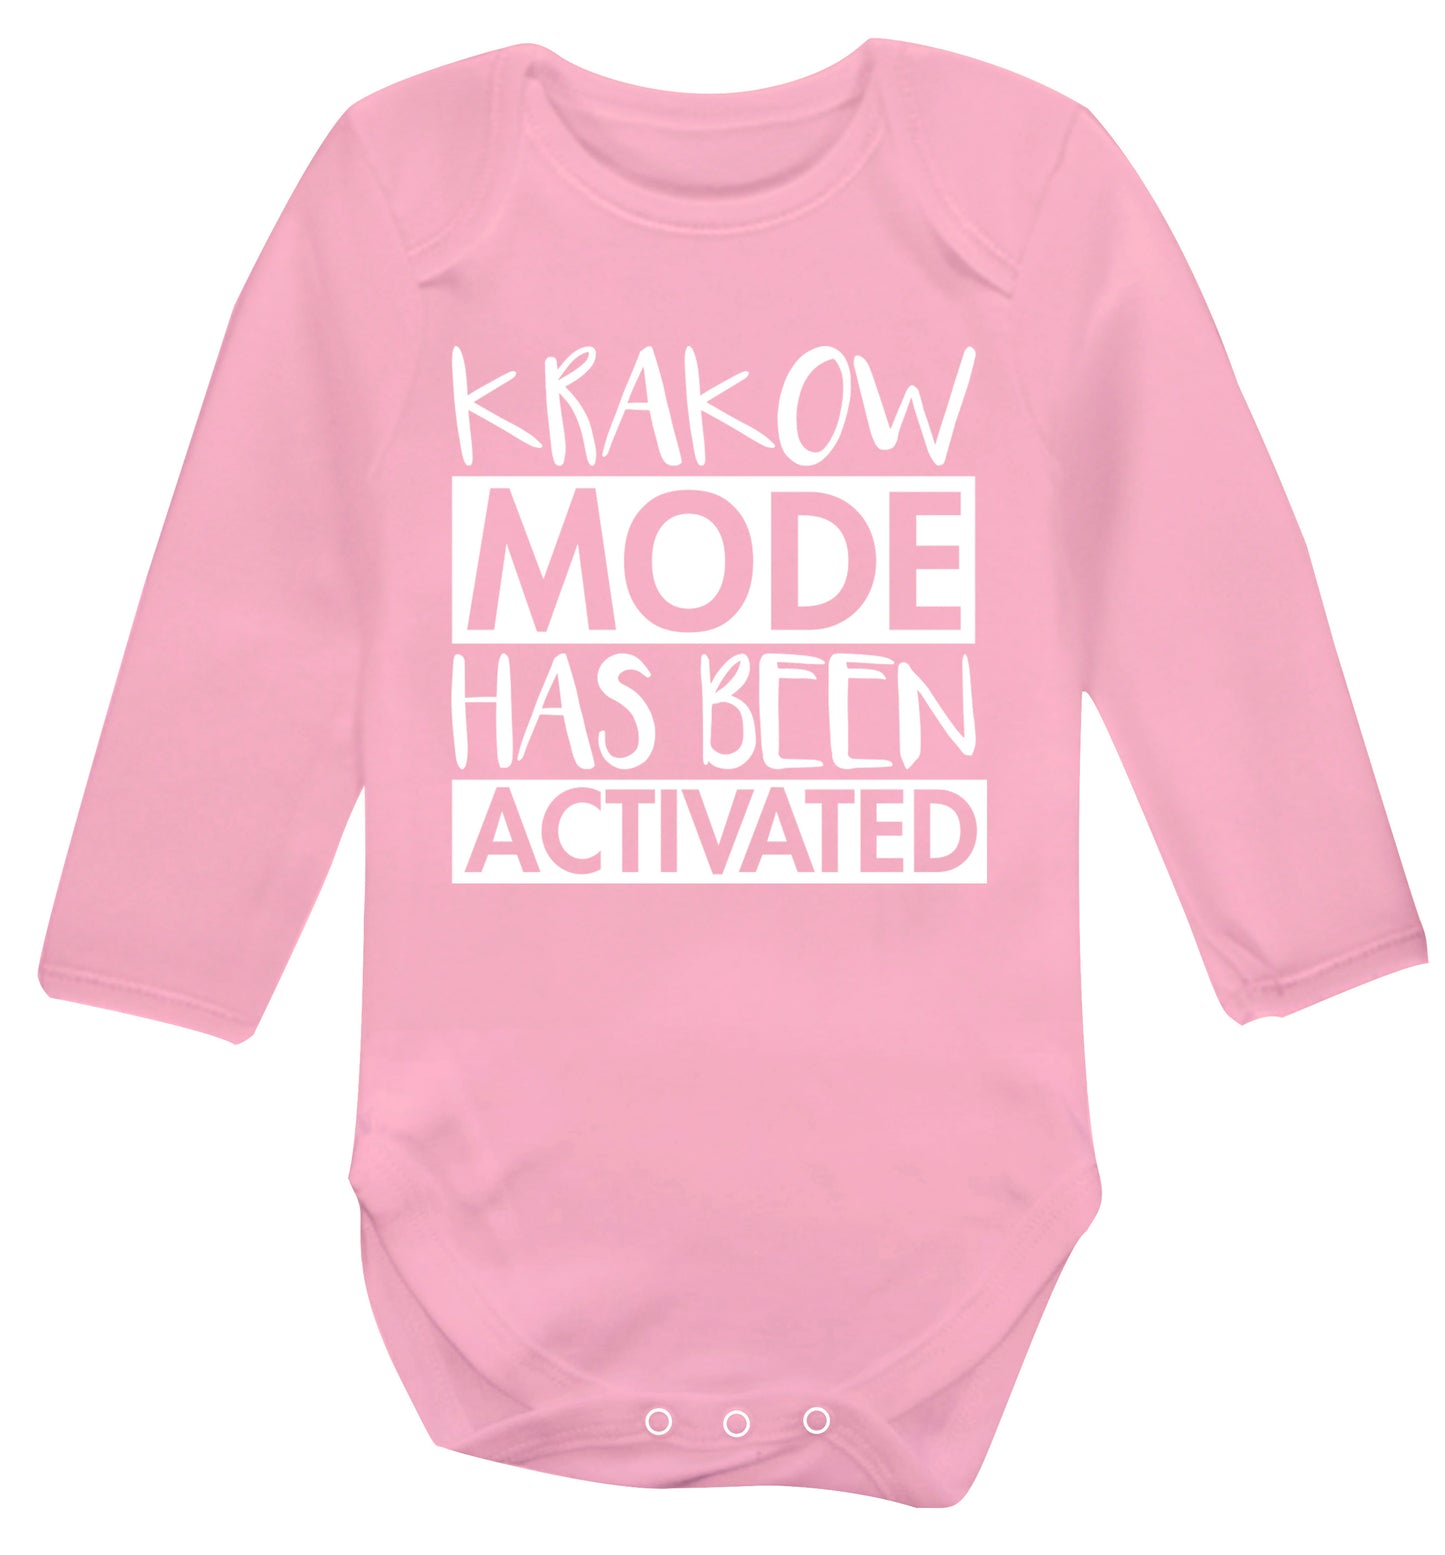 Krakow mode has been activated Baby Vest long sleeved pale pink 6-12 months